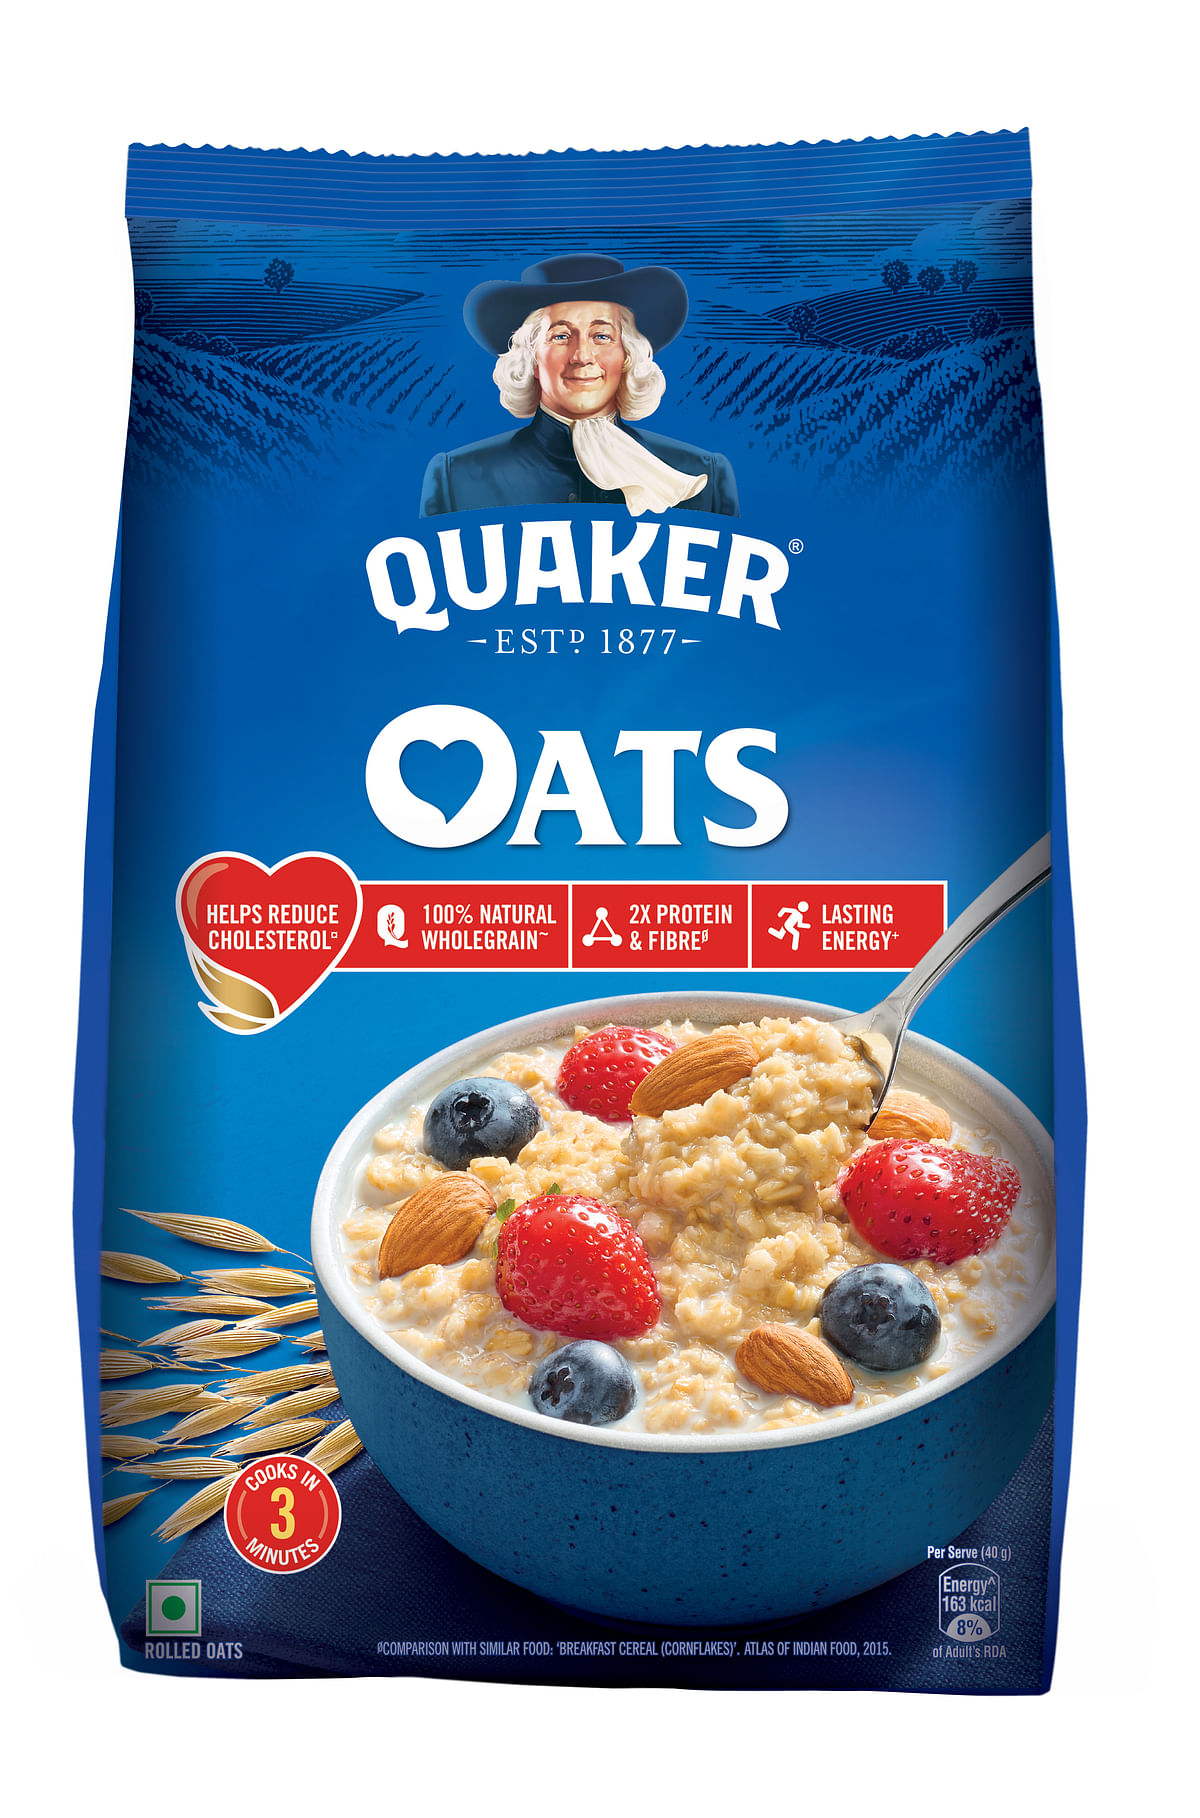 Quaker Oats cooks up a new logo and packaging design